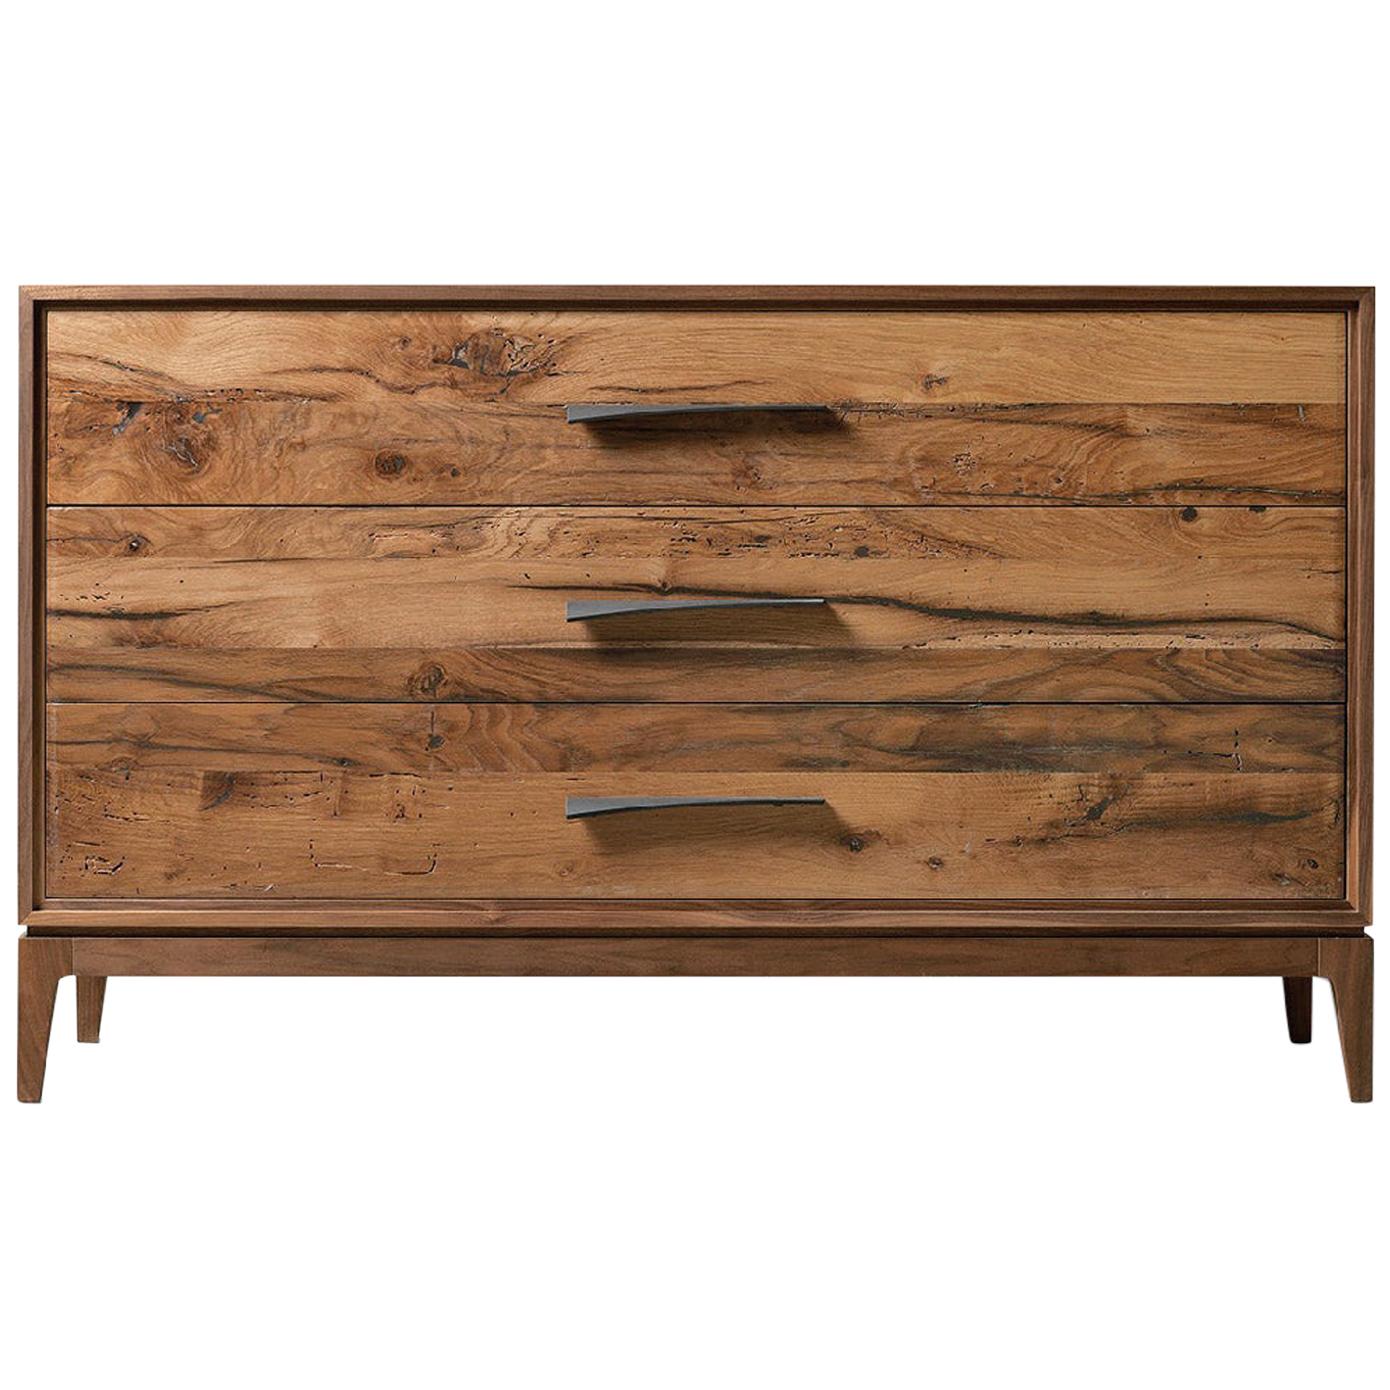 Velo Solid Wood Dresser, Walnut in Hand-Made Natural Finish, Contemporary